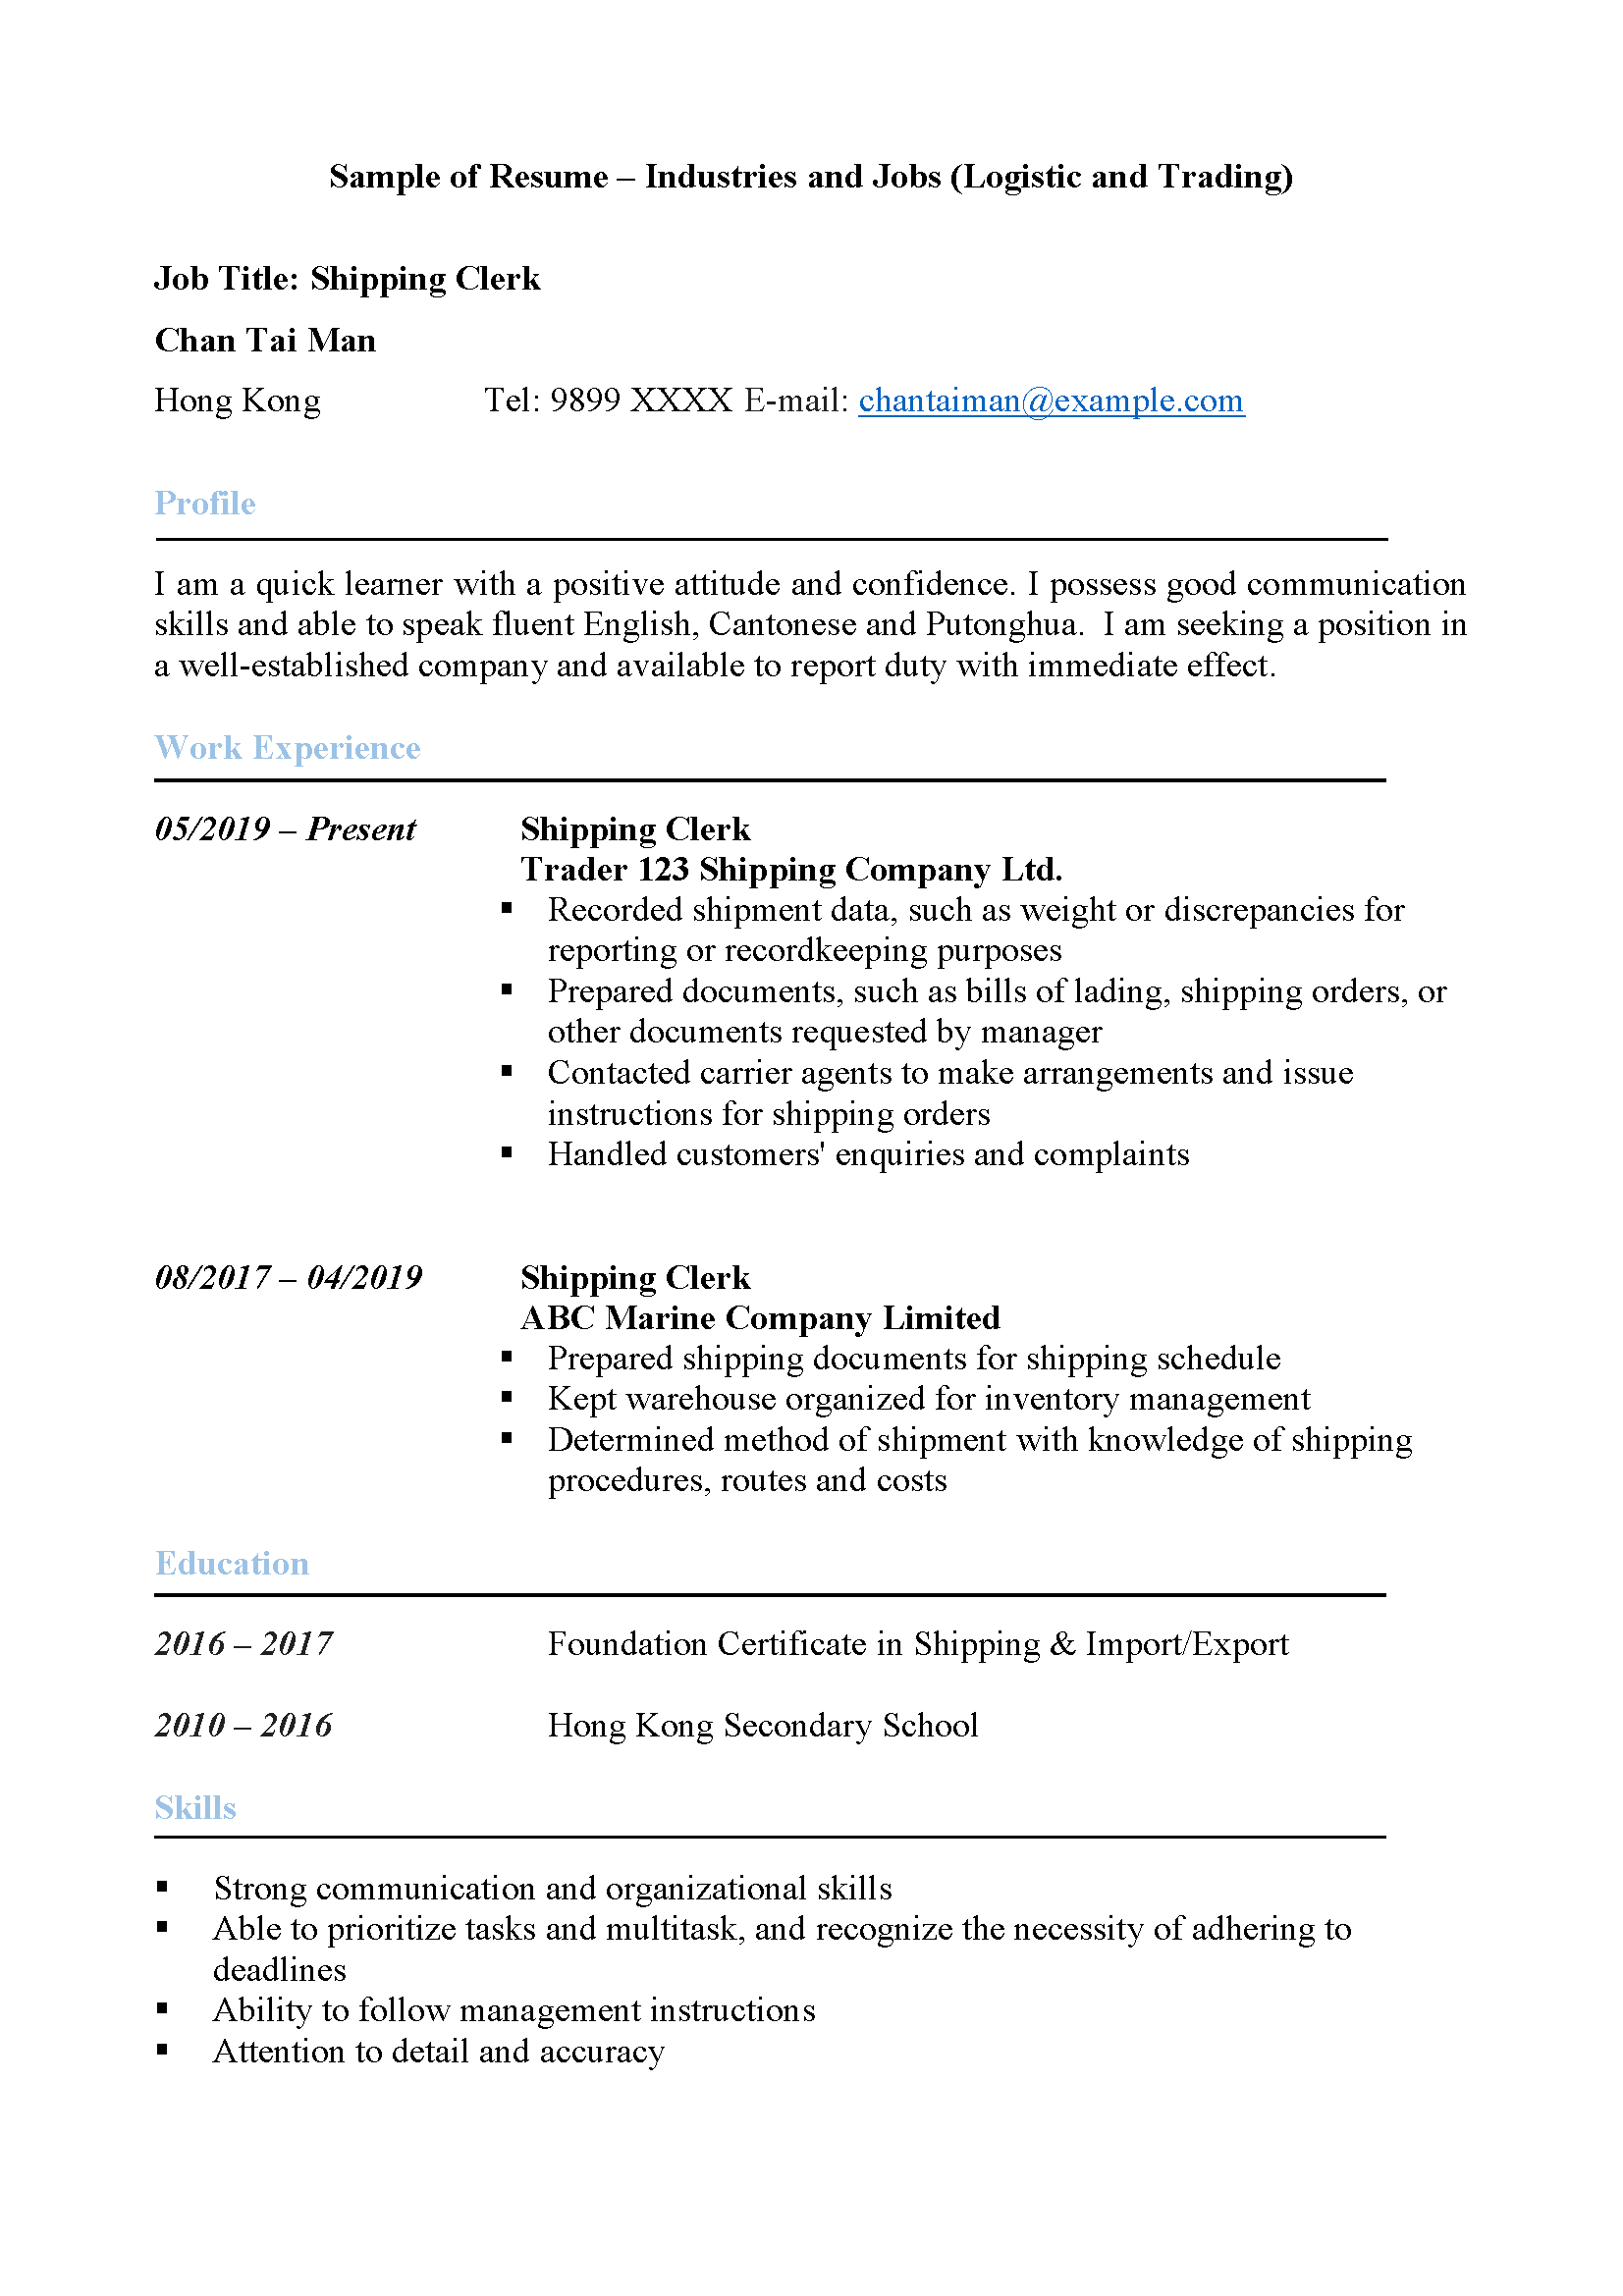 Logistic and Trading Resume Sample